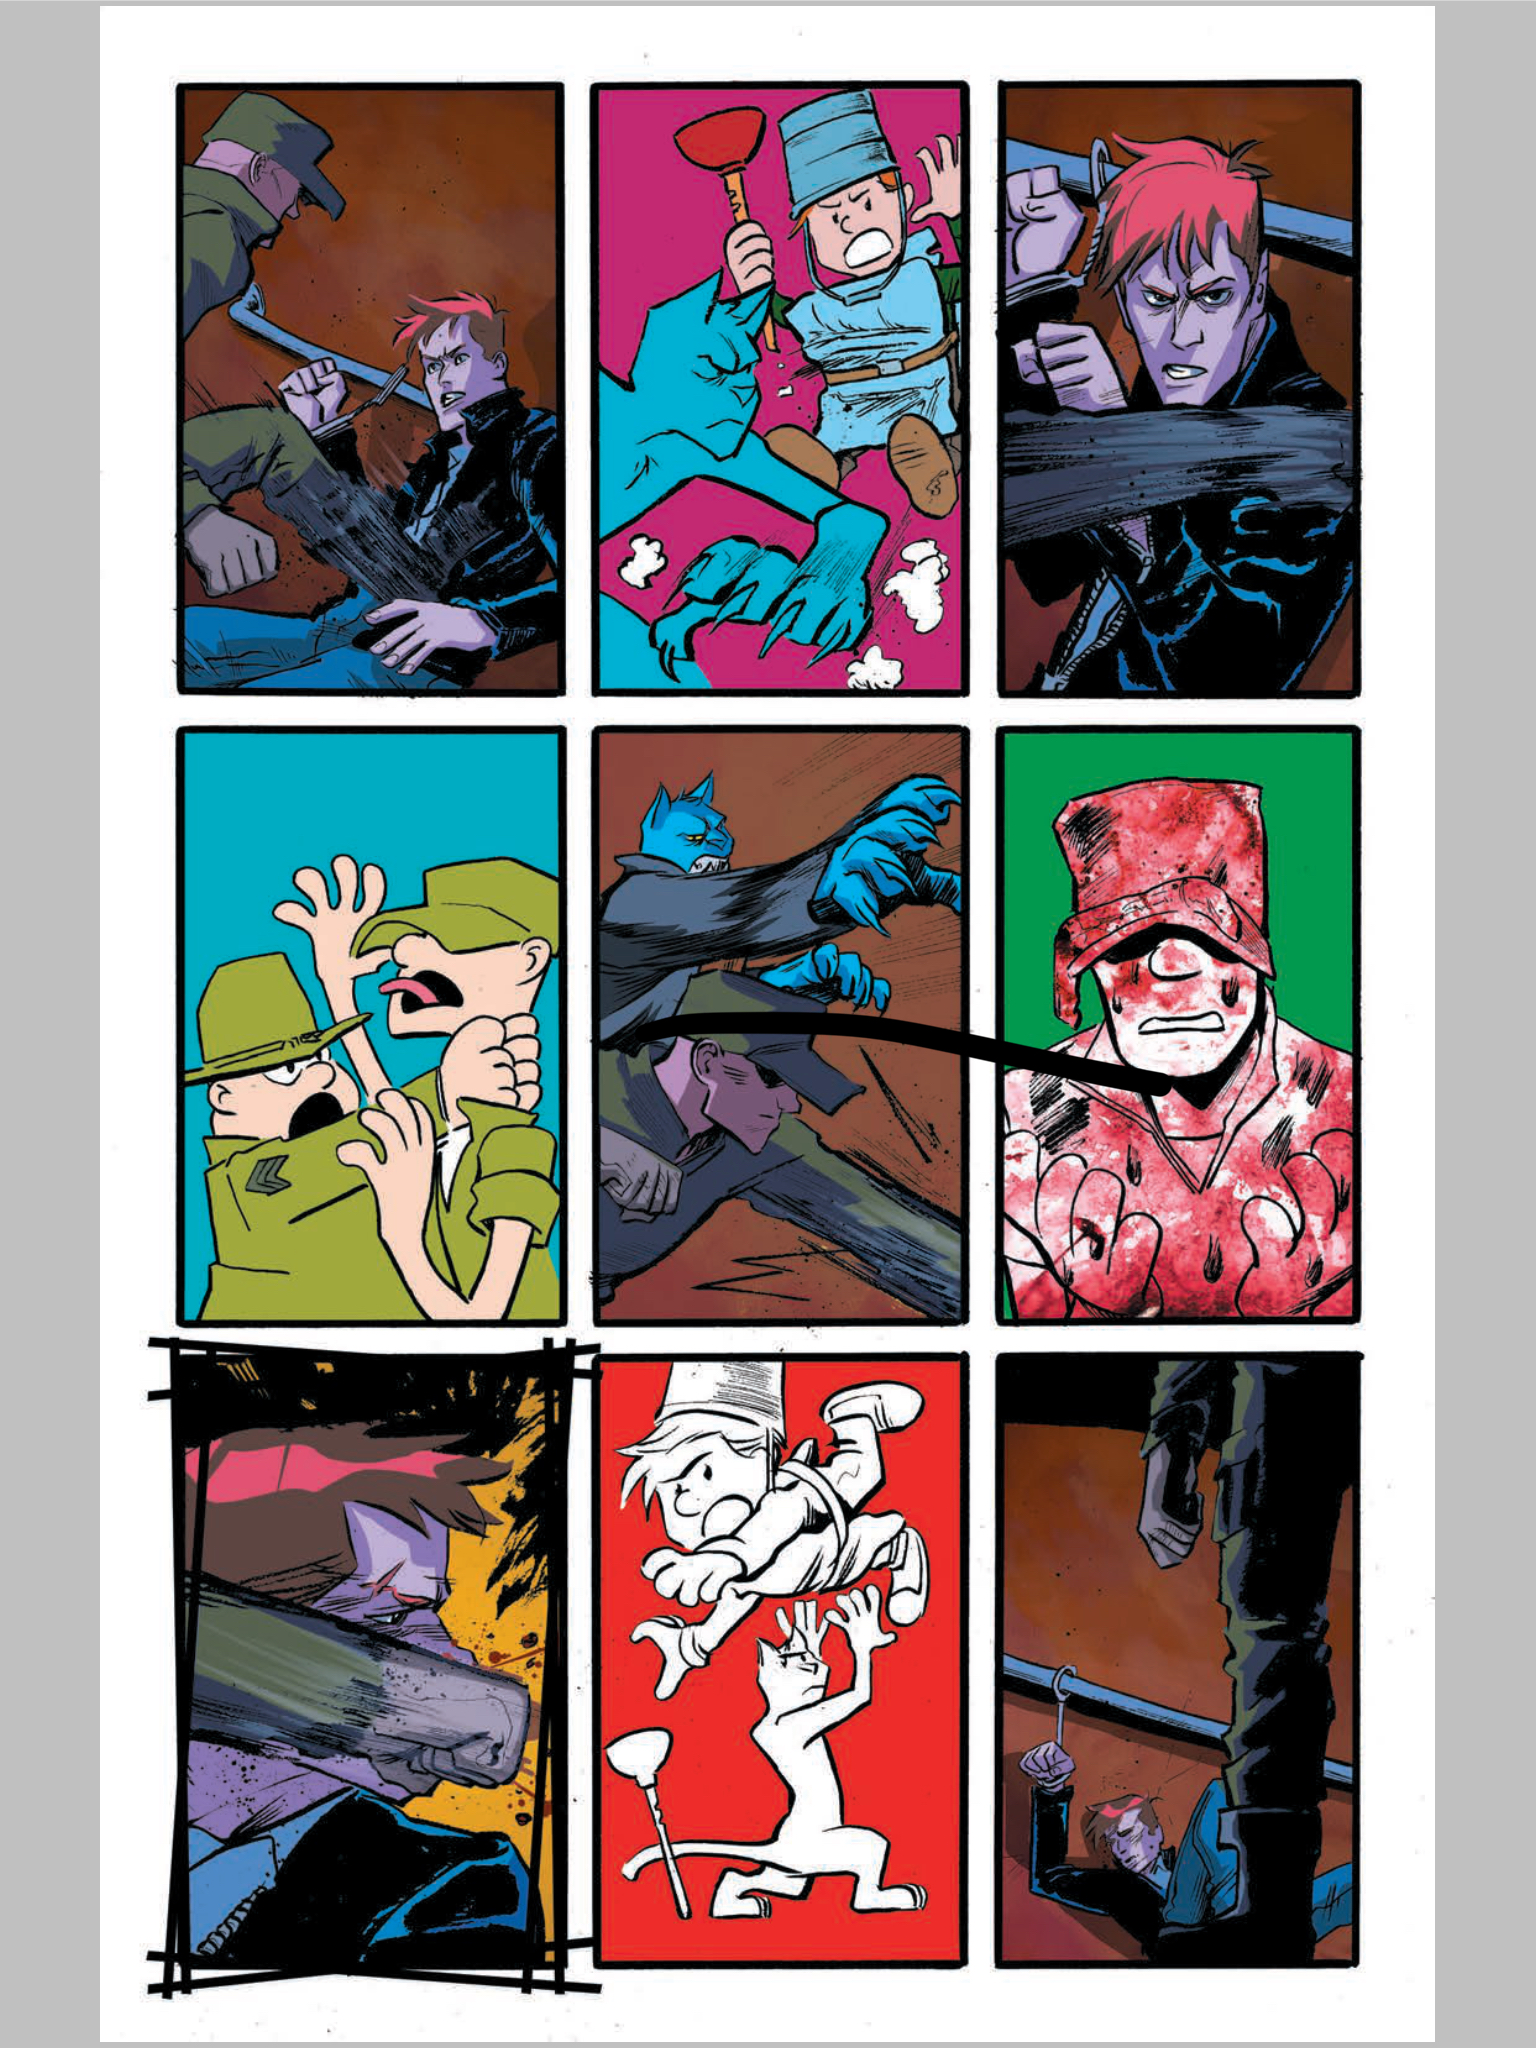 SPENCER & LOCKE 2 #1 nine-panel page shows all Pepose’s and Santiago’s influences.